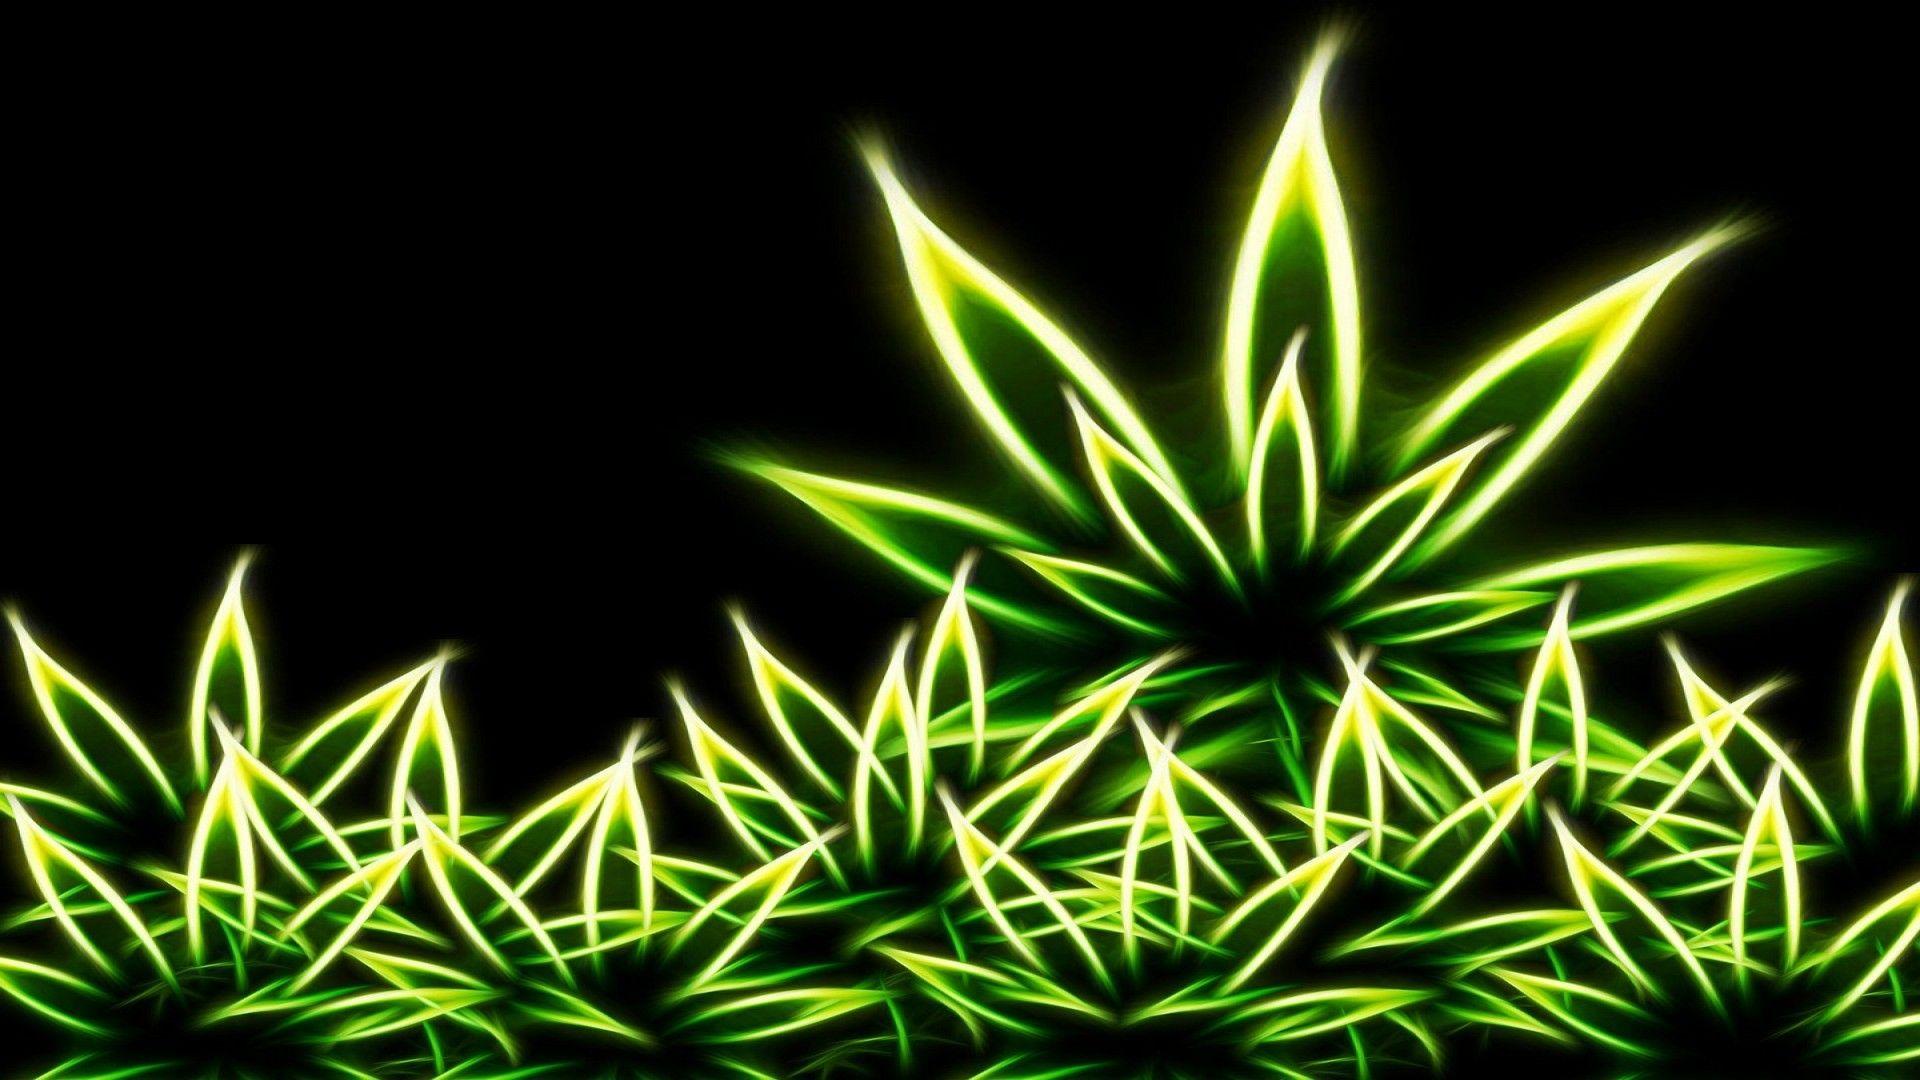 best image about Weed Wallpaper. Wallpaper 4k